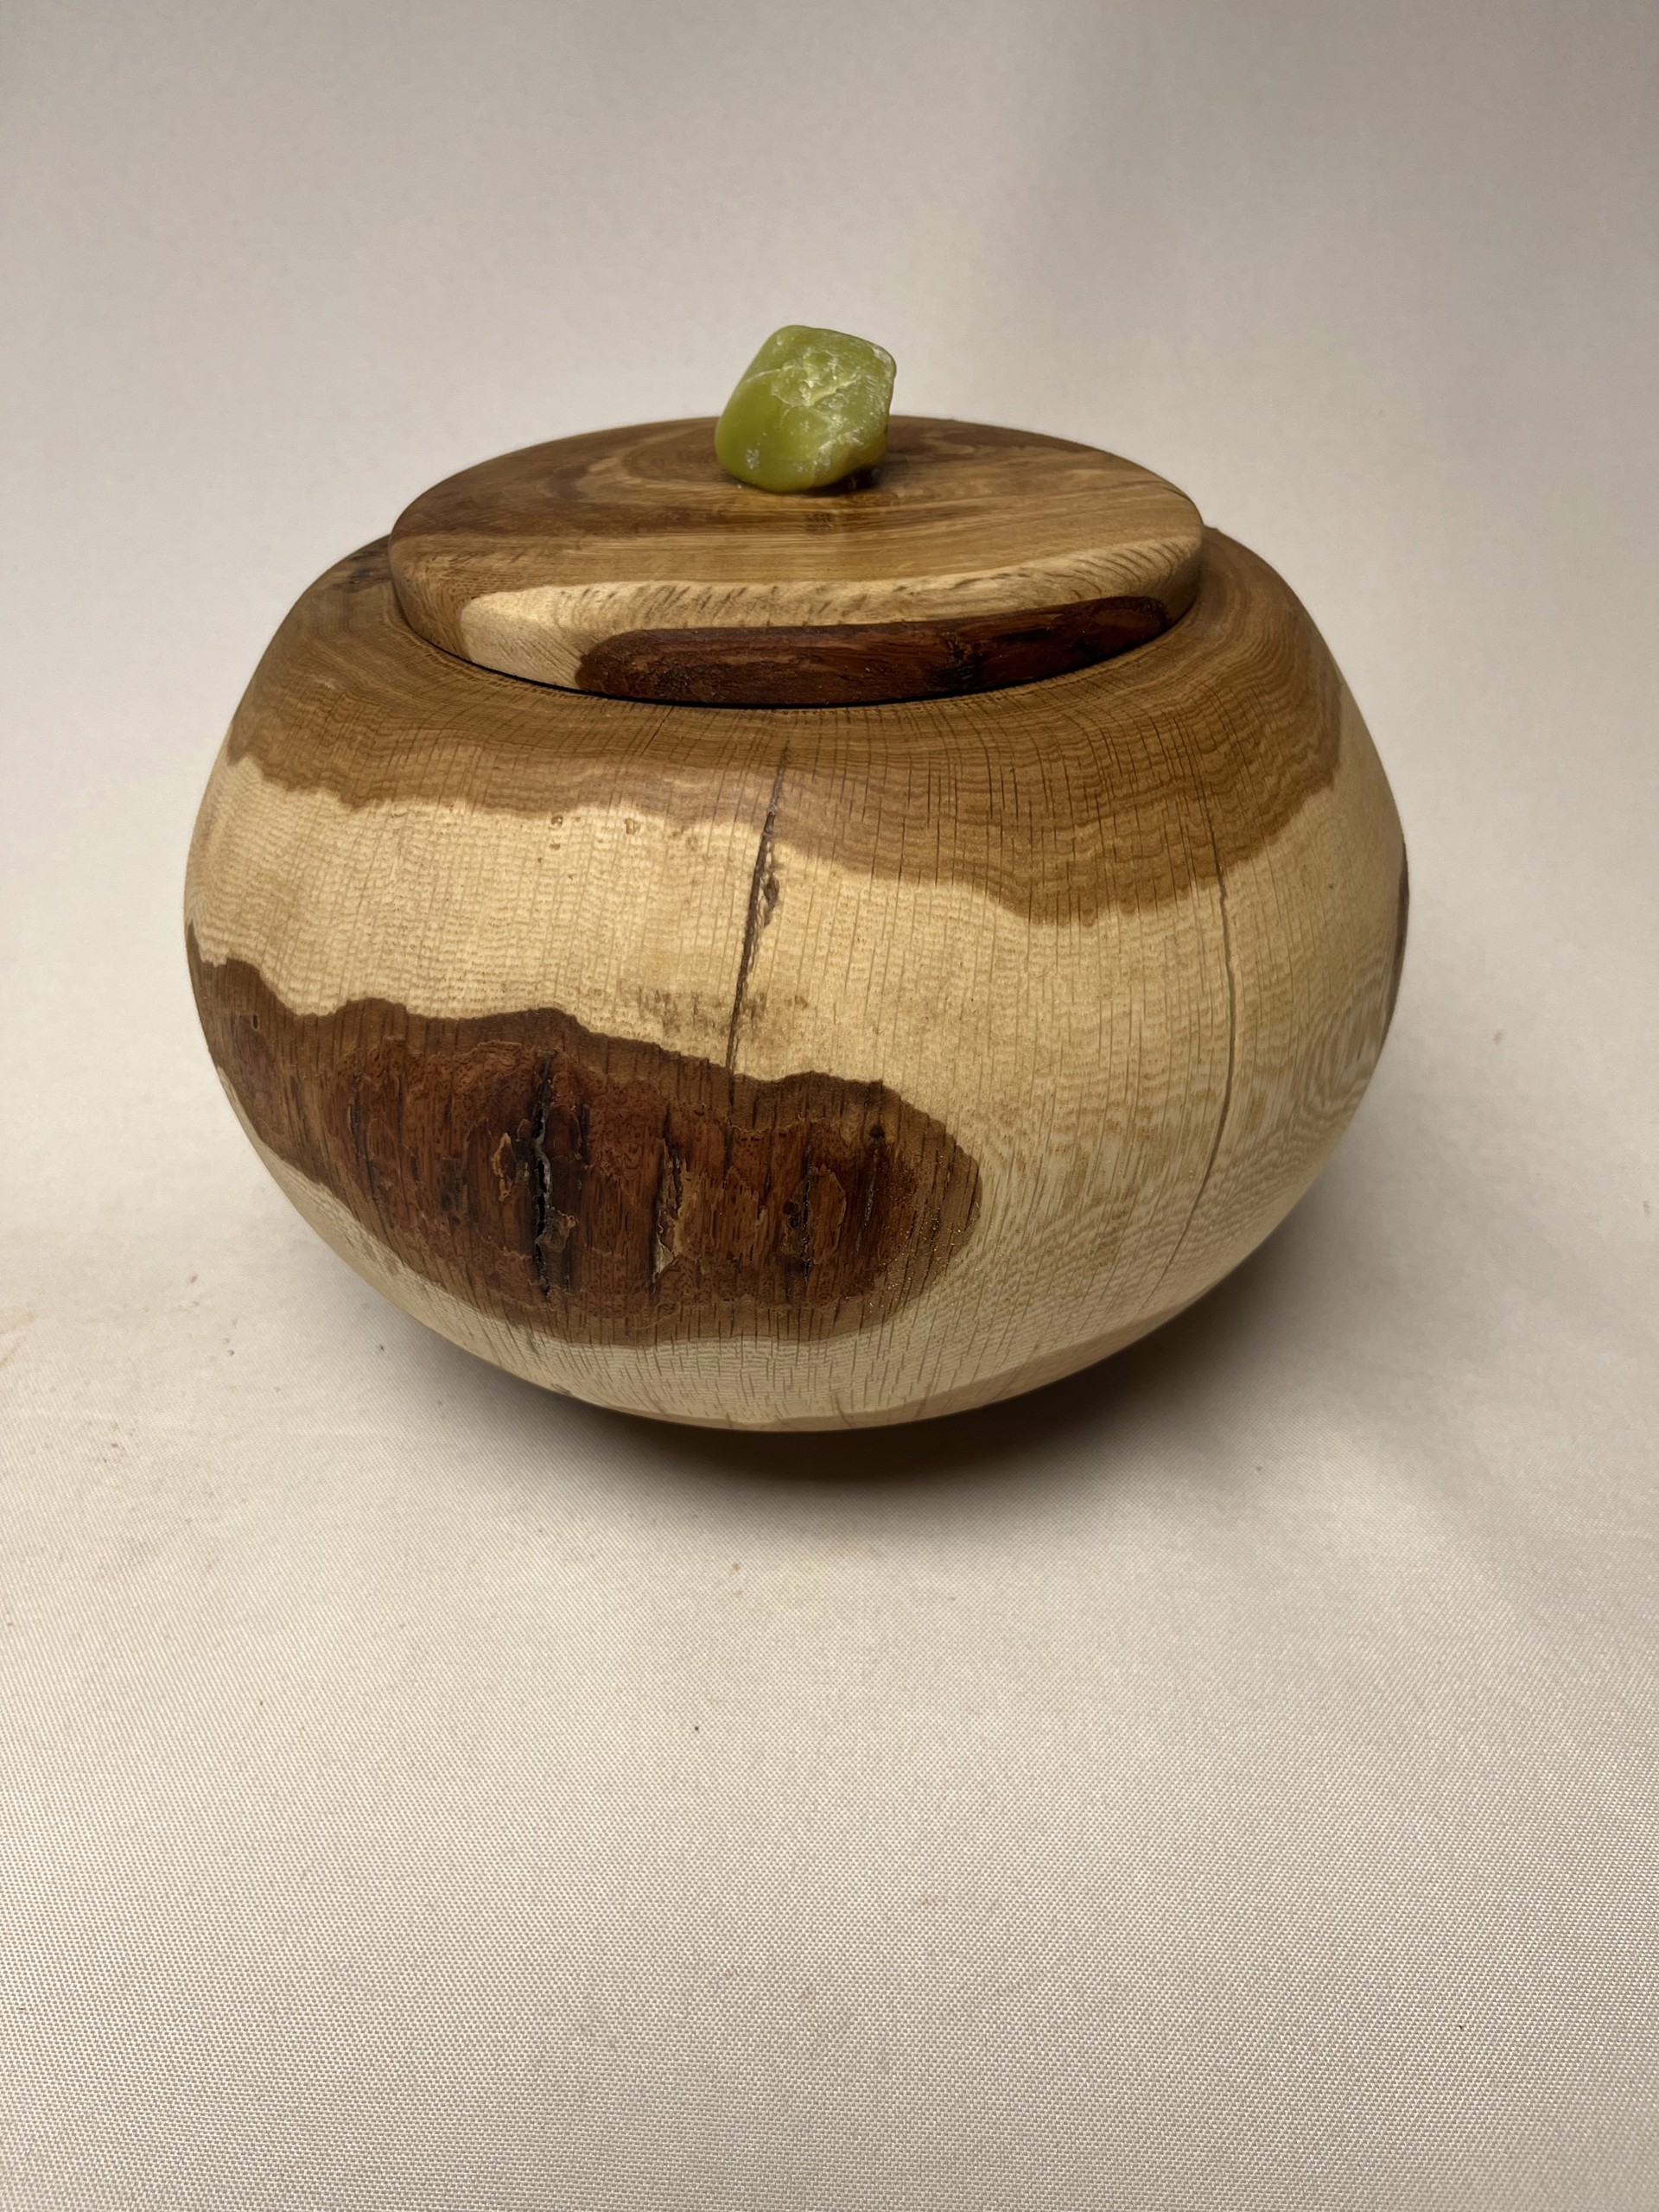 Turned Wood Jar W/Lid #22-72 by Rick Squires